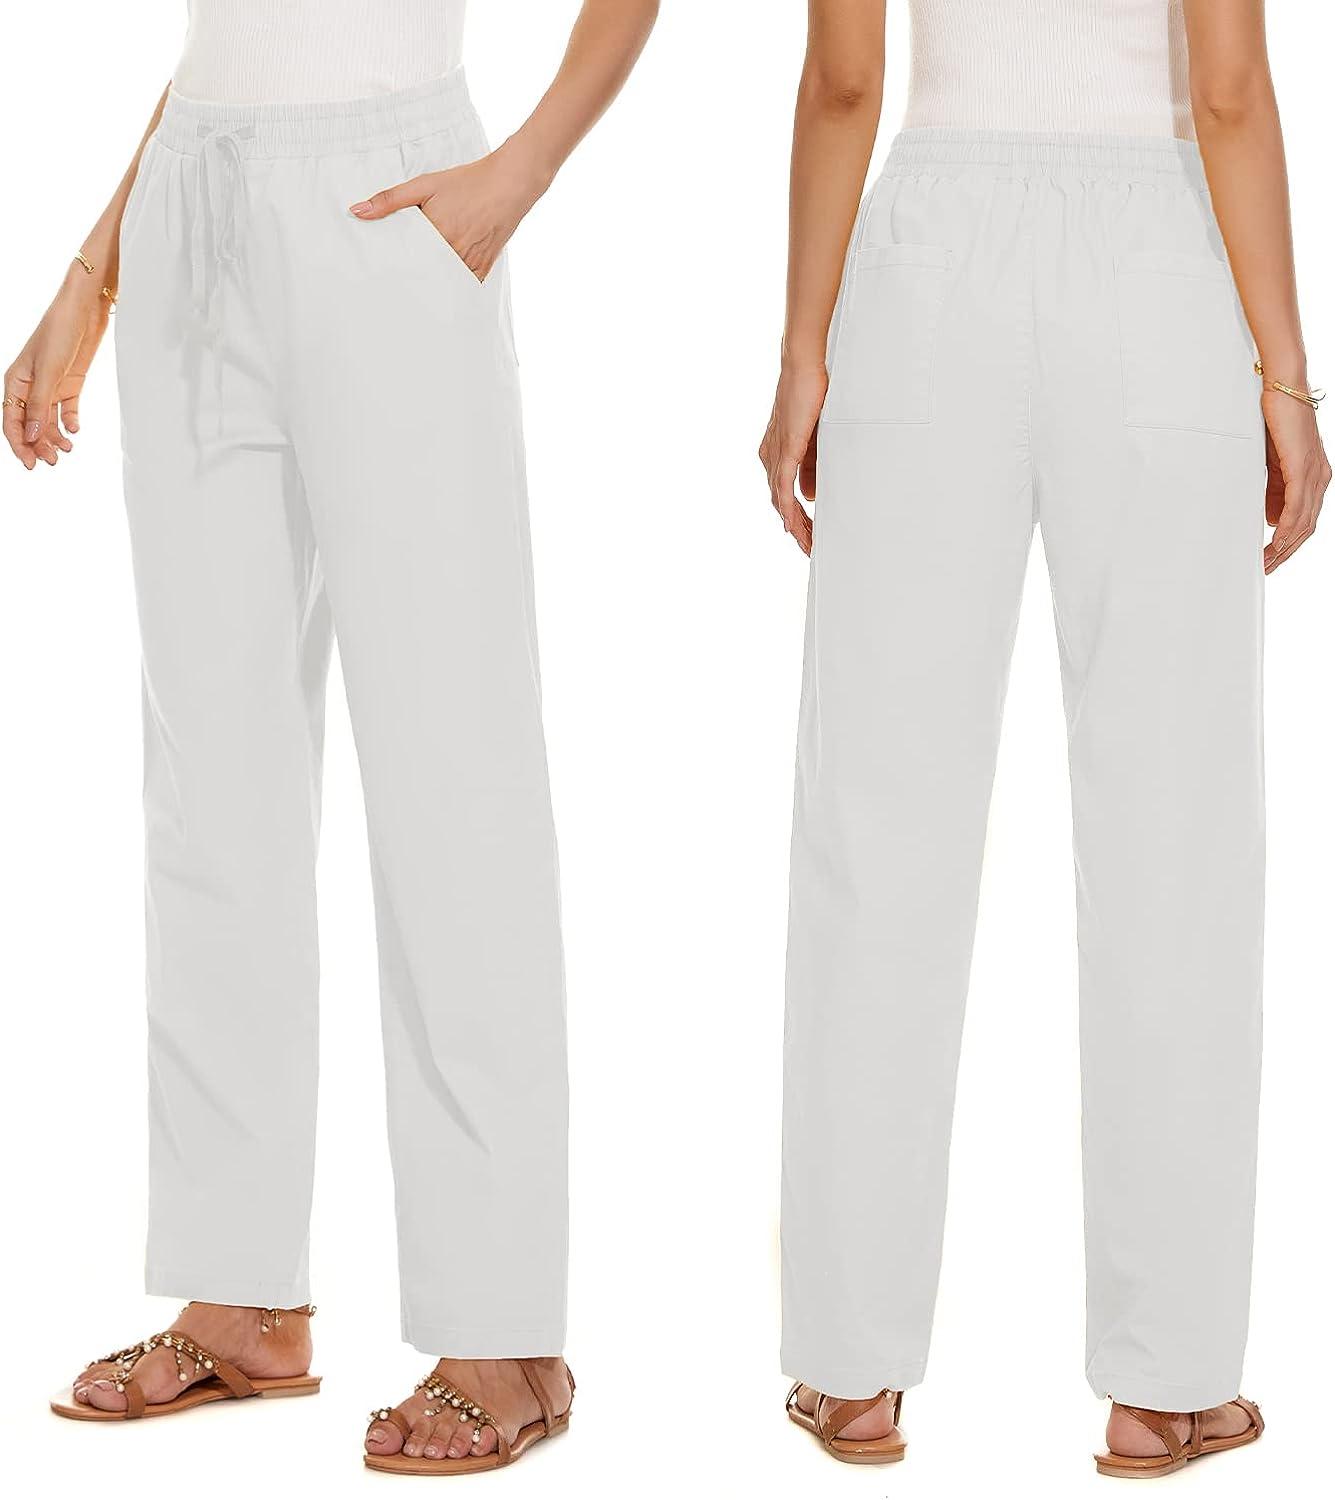 Buy White Solid Women Trouser Cotton Flax Fabric for Best Price, Reviews,  Free Shipping